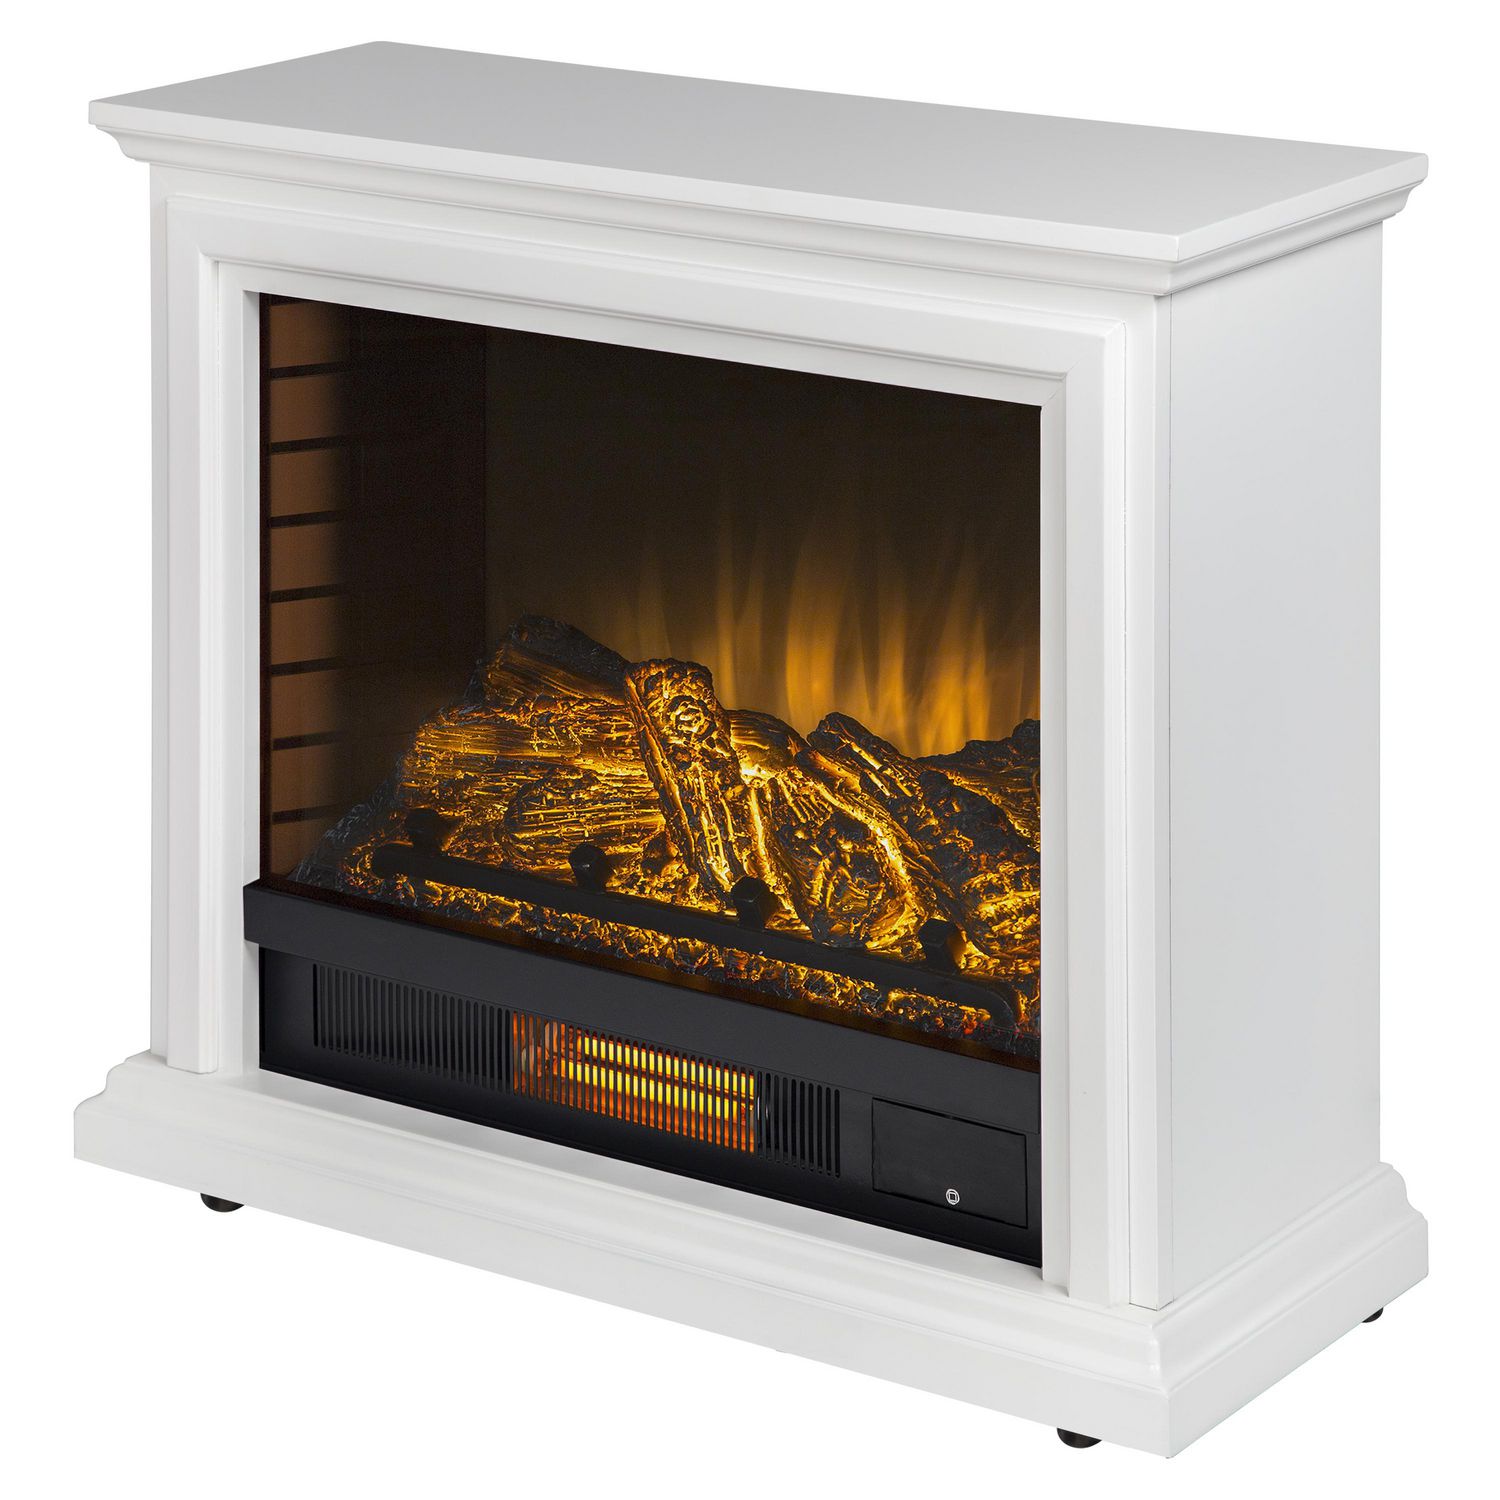 Crawford Line Electric Fireplace in White 